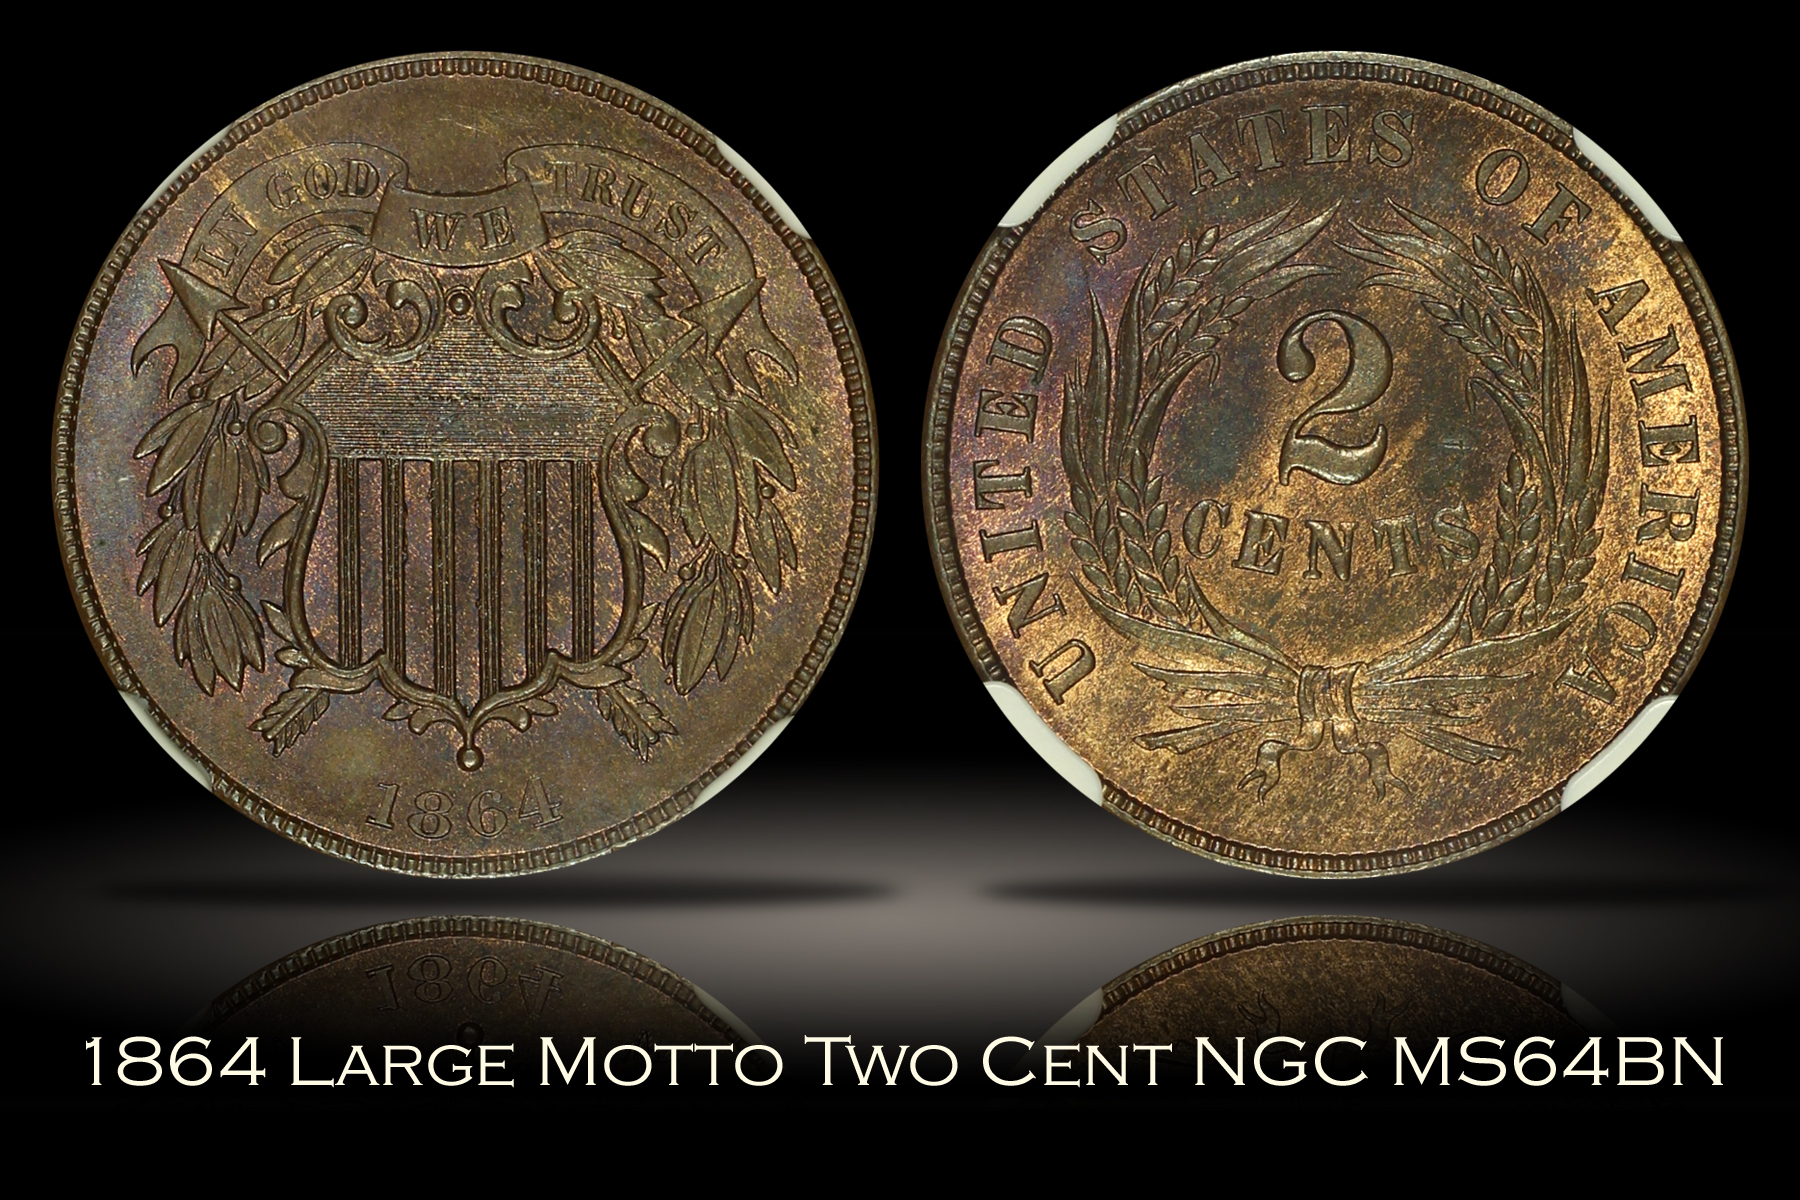 1864 Large Motto Two Cent NGC MS64BN